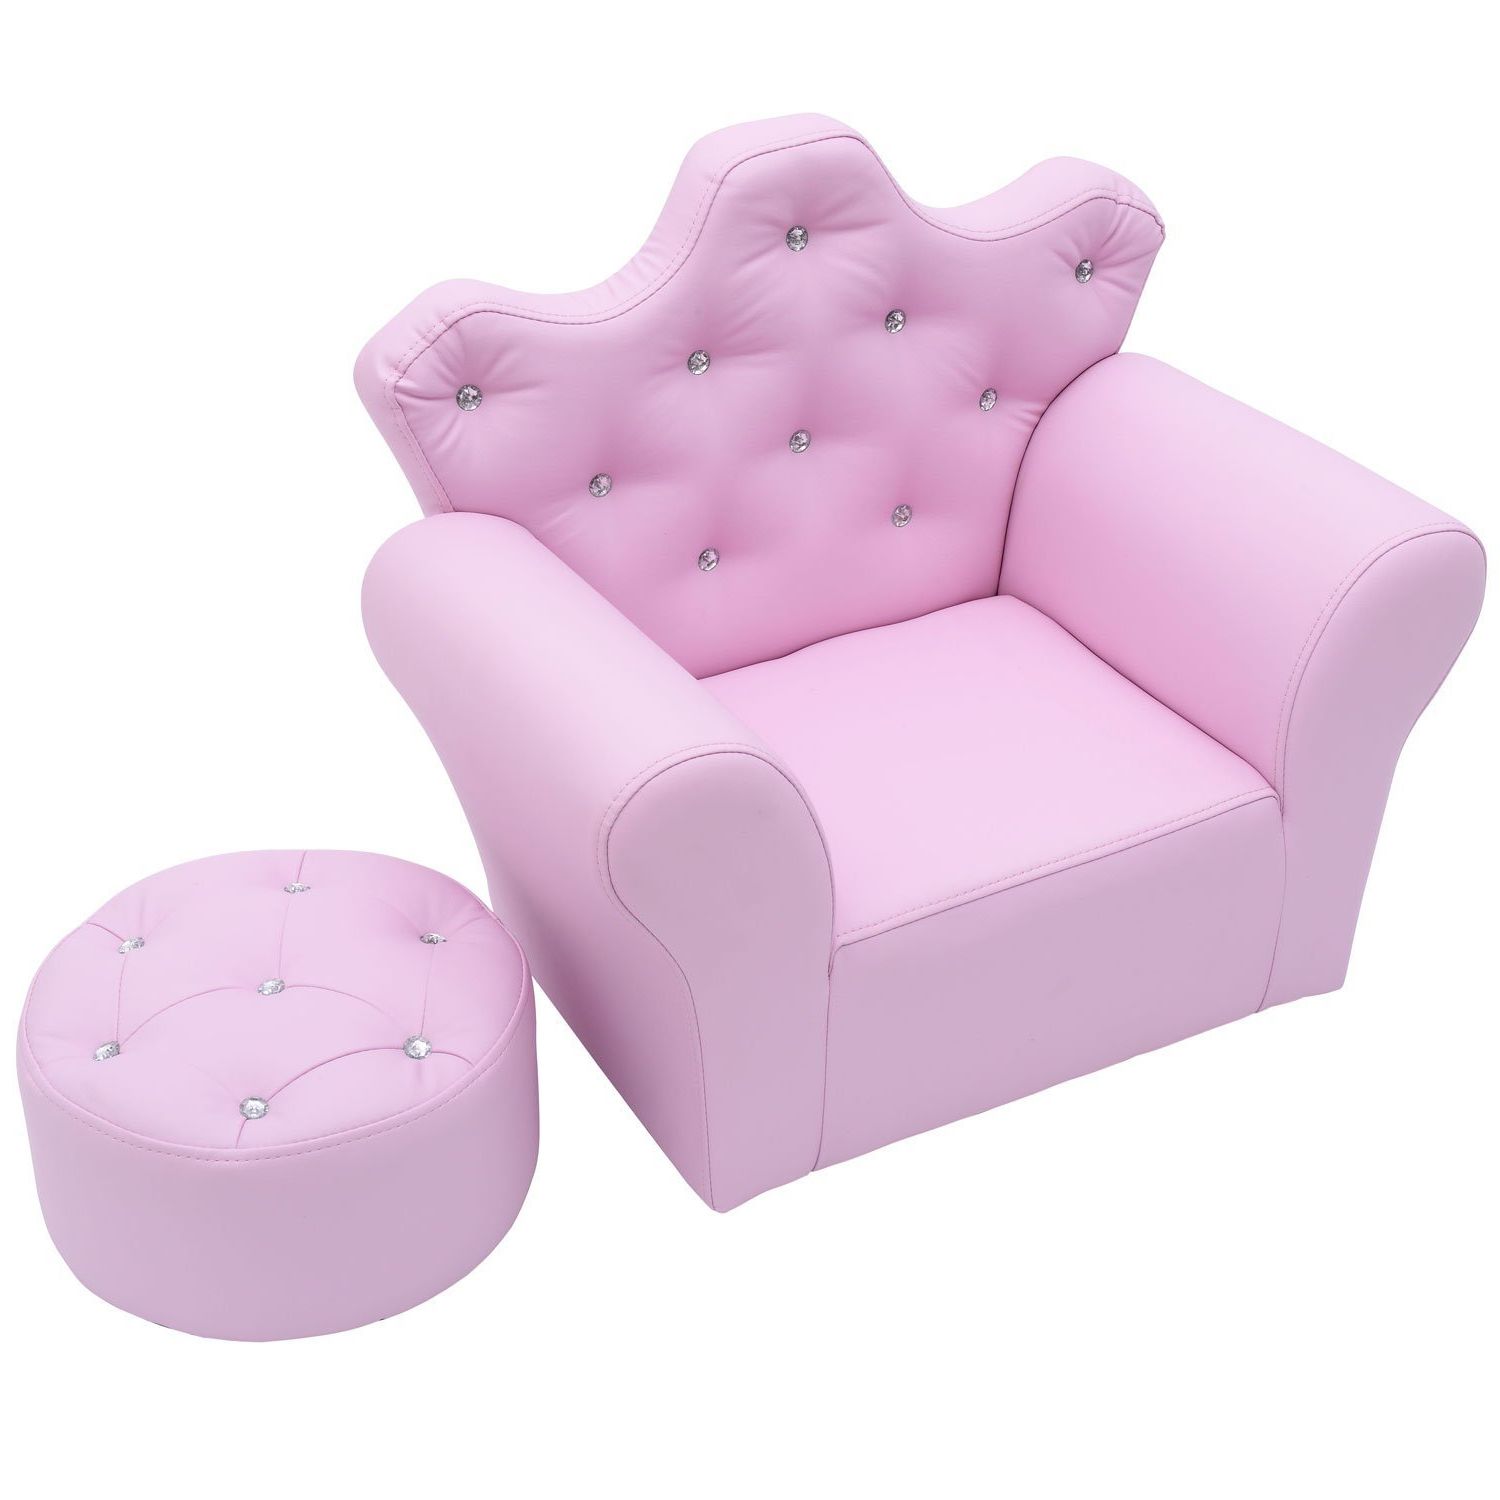 Bedroom : Sofa For Children's Room Kids Foam Fold Out Couch Pink With Popular Toddler Sofa Chairs (View 6 of 20)